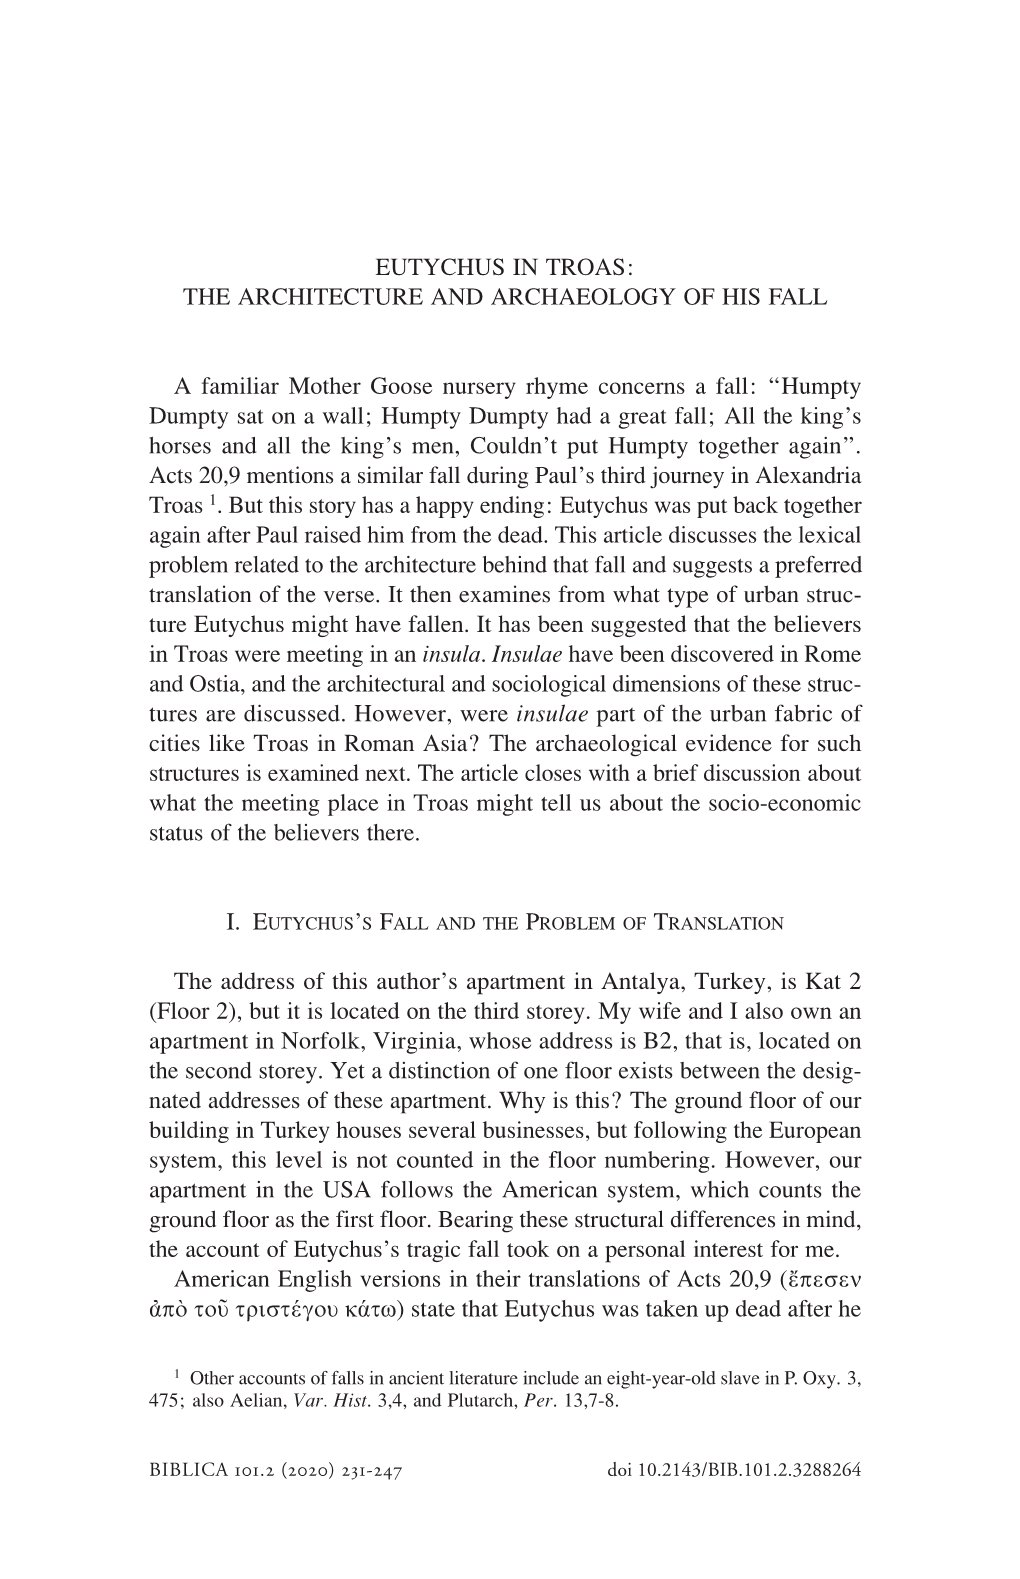 Eutychus in Troas: the Architecture and Archaeology of His Fall